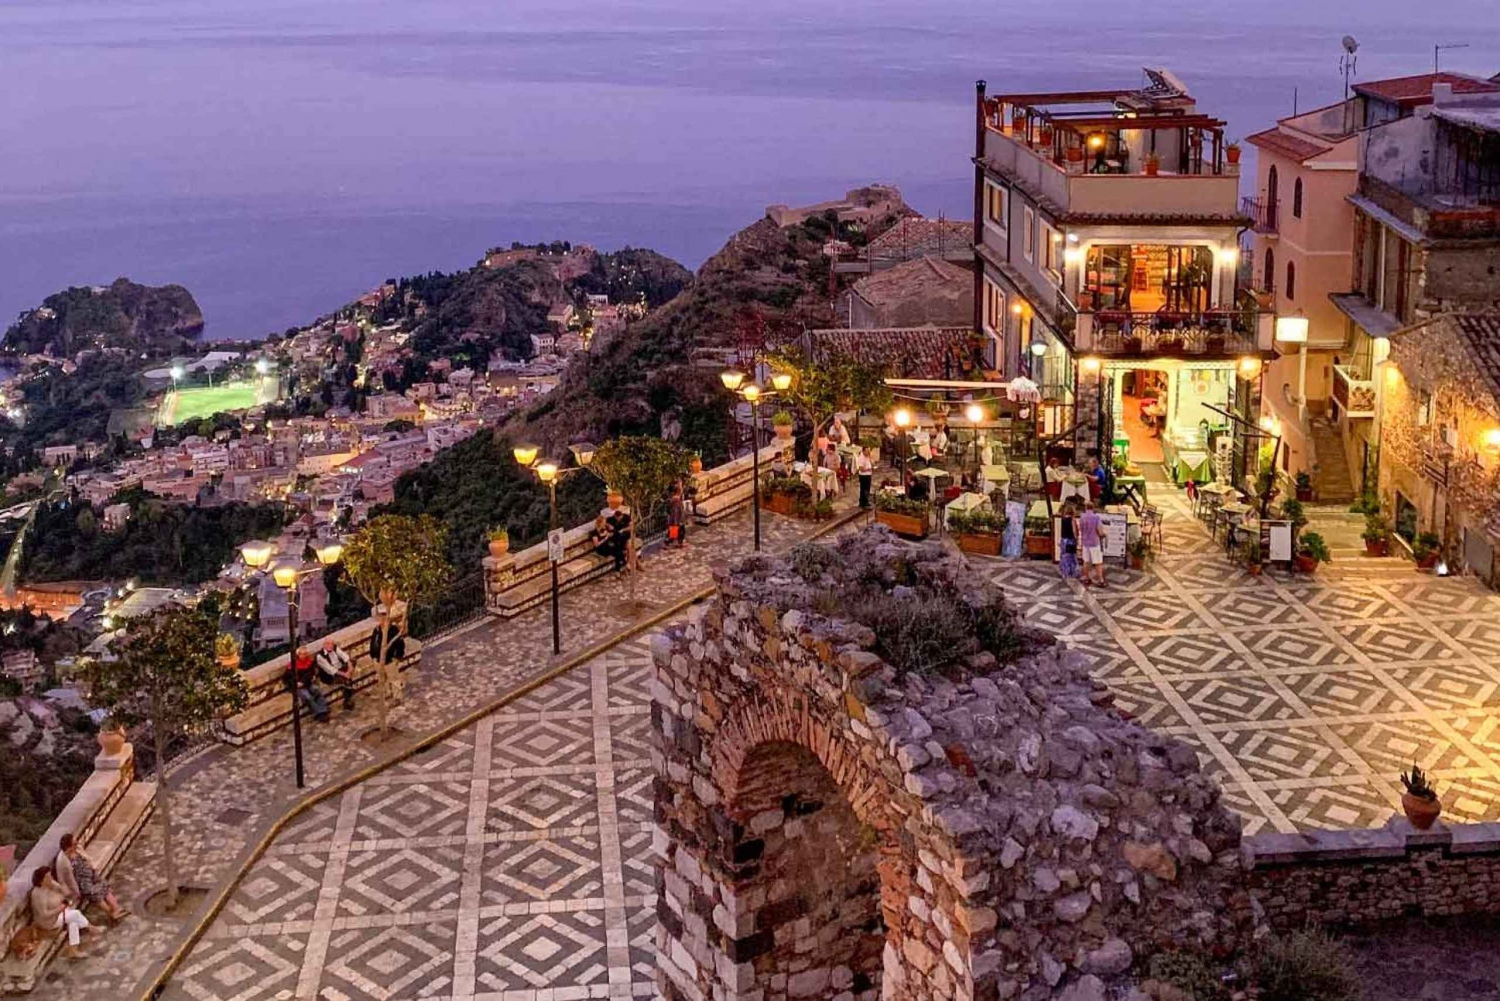 From Siracusa: Guided Tour of Taormina and Isola Bella